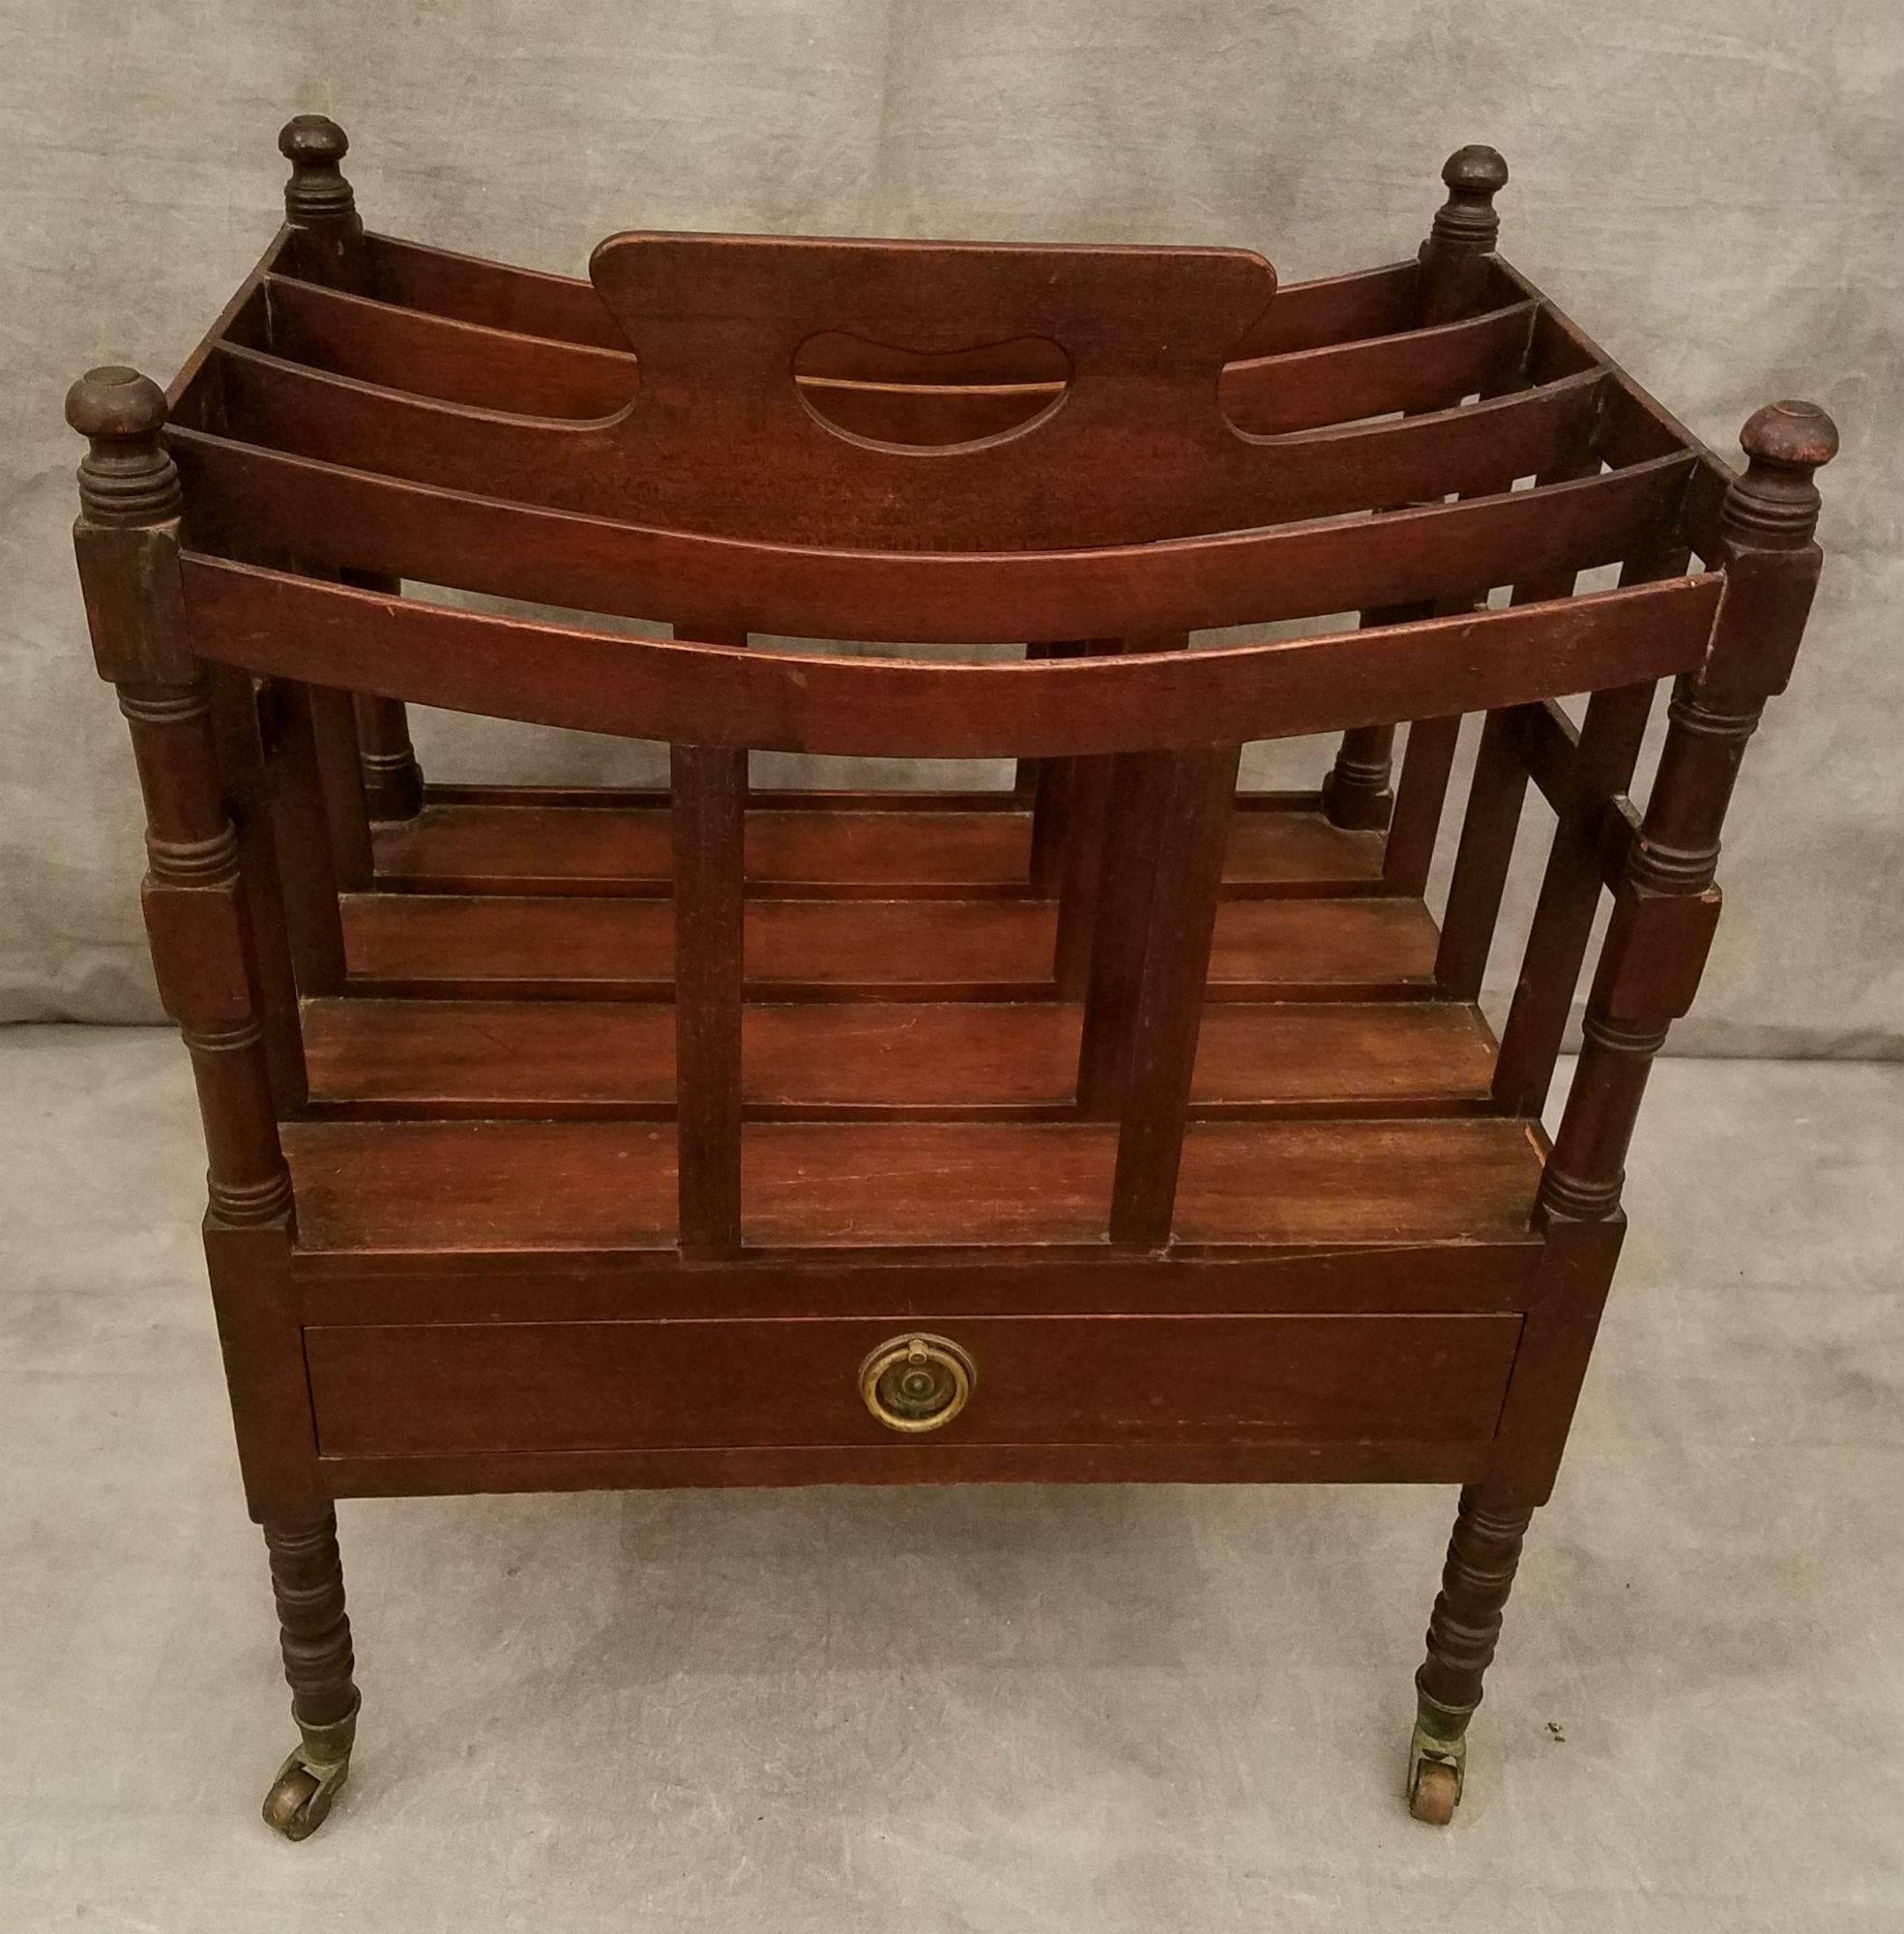 Regency style mahogany four divide canterbury with single frieze drawer on turned legs ending with brass caps and casters, the underside stamped QUIGLEY.